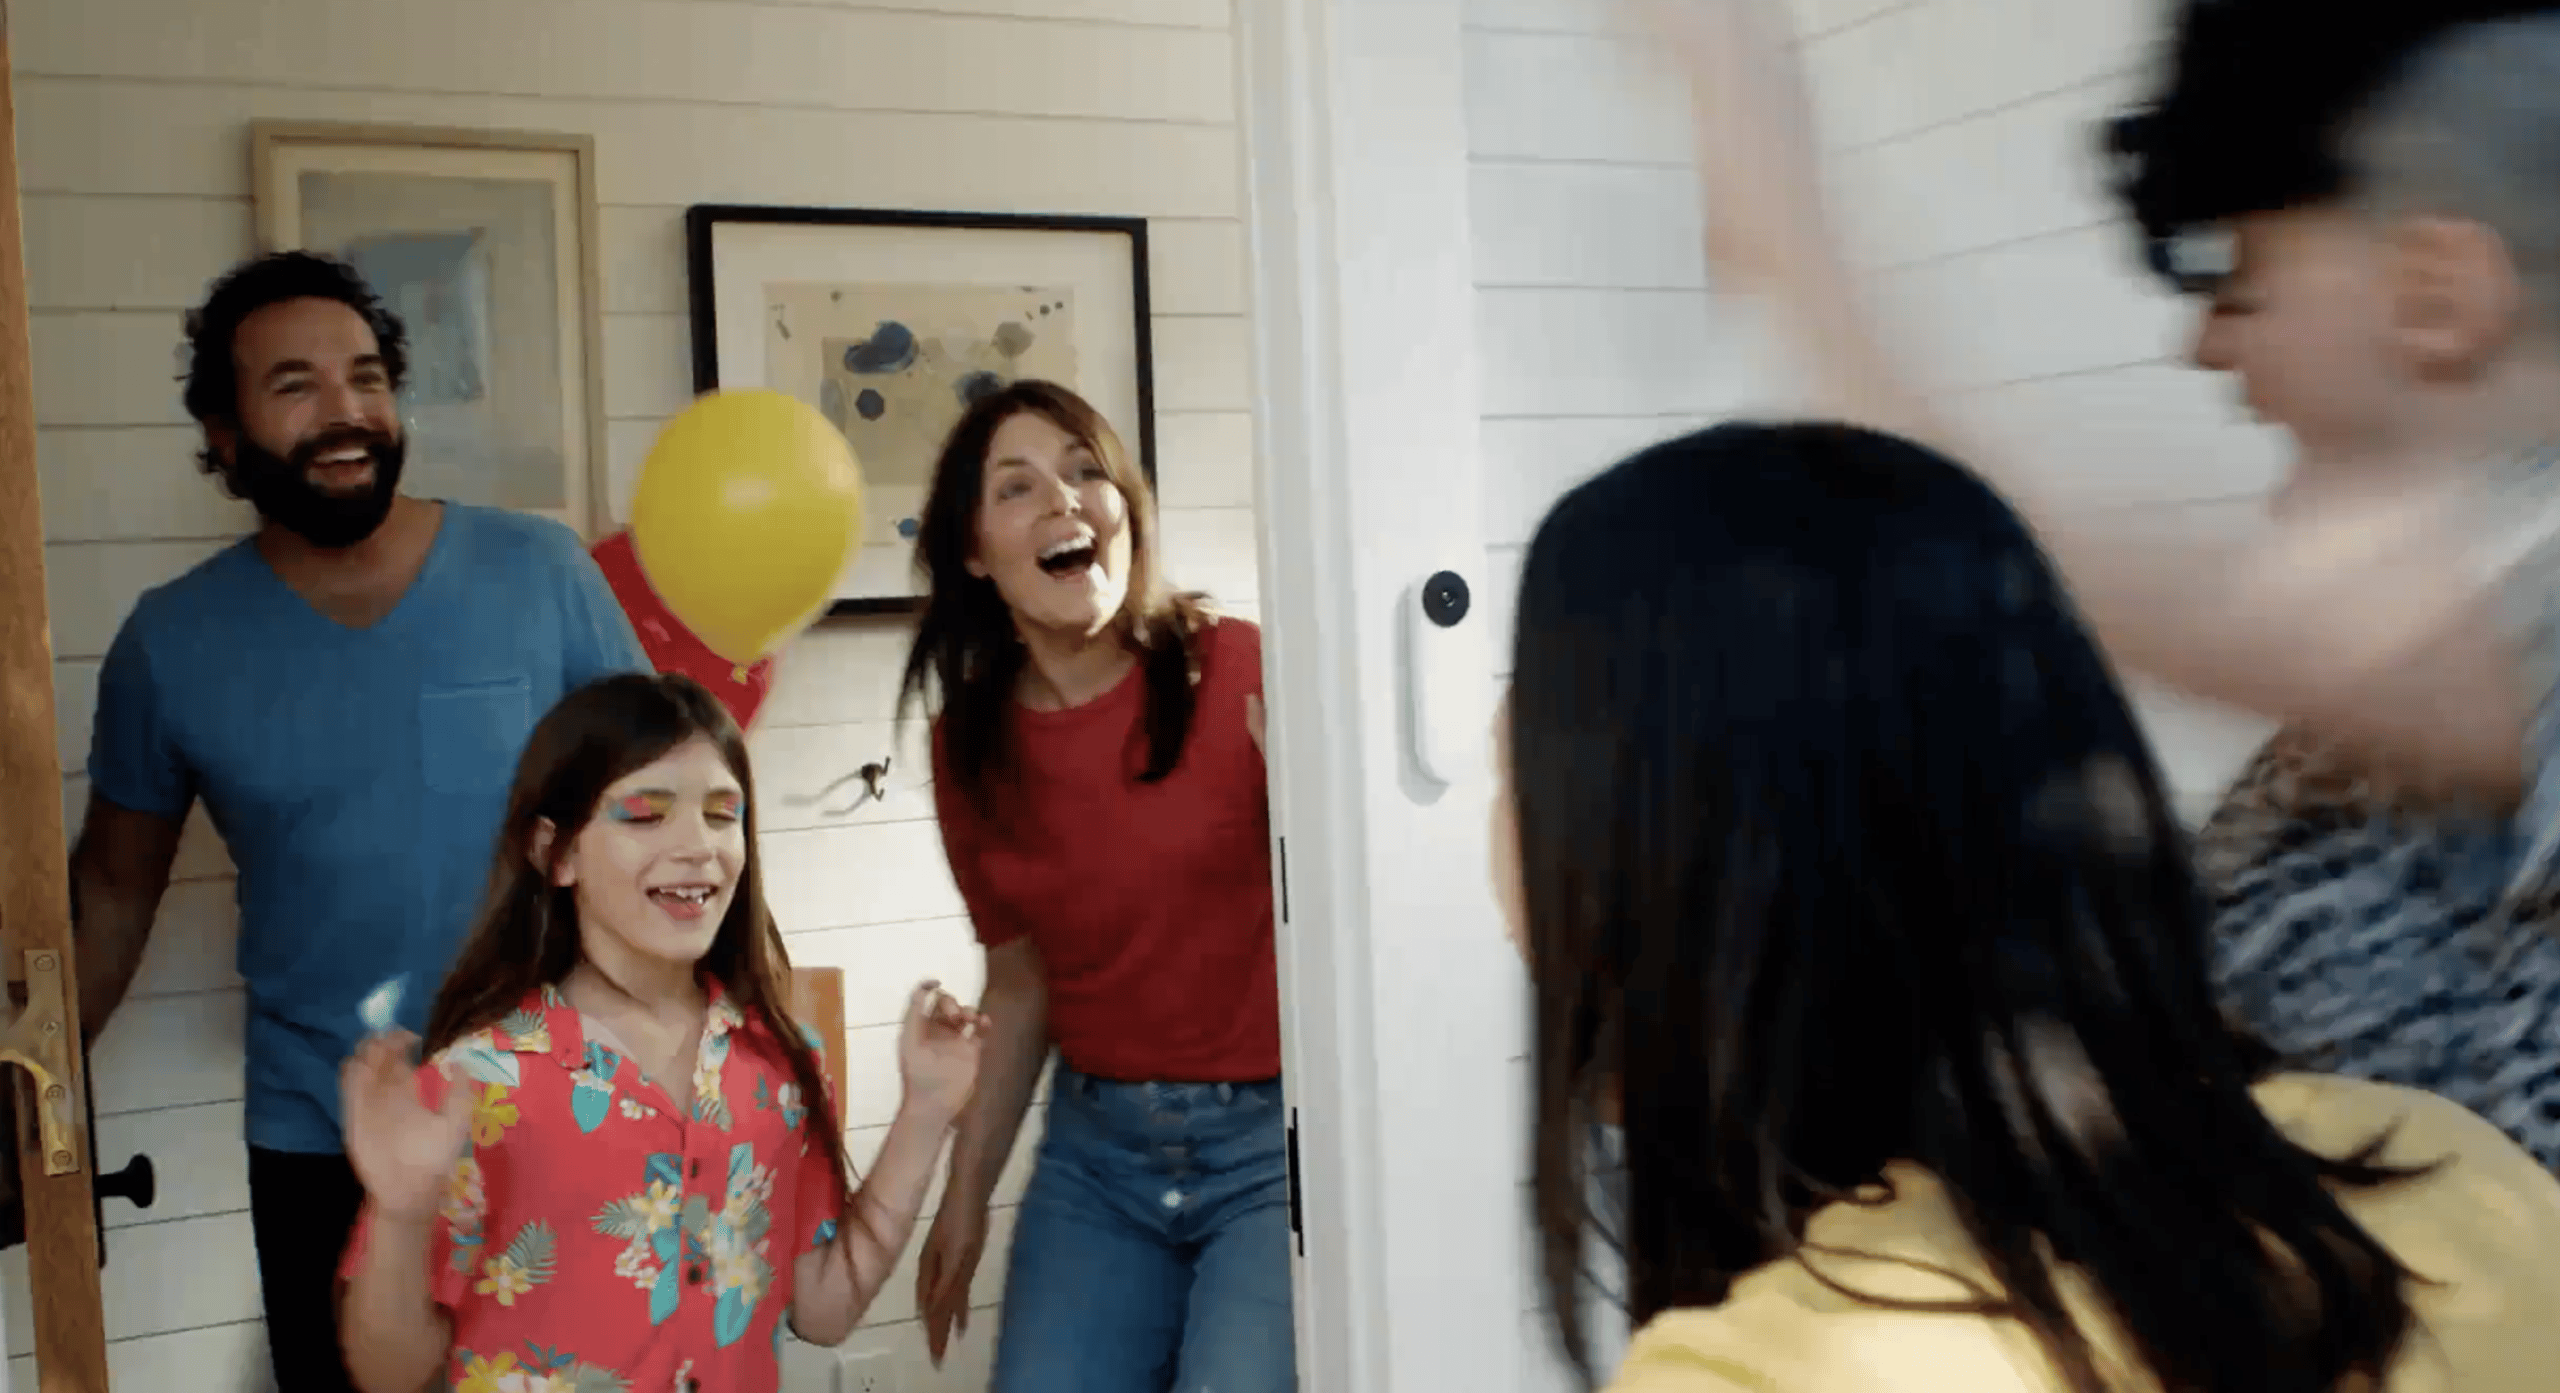 Photos of a family answering their door to friends on their child's birthday